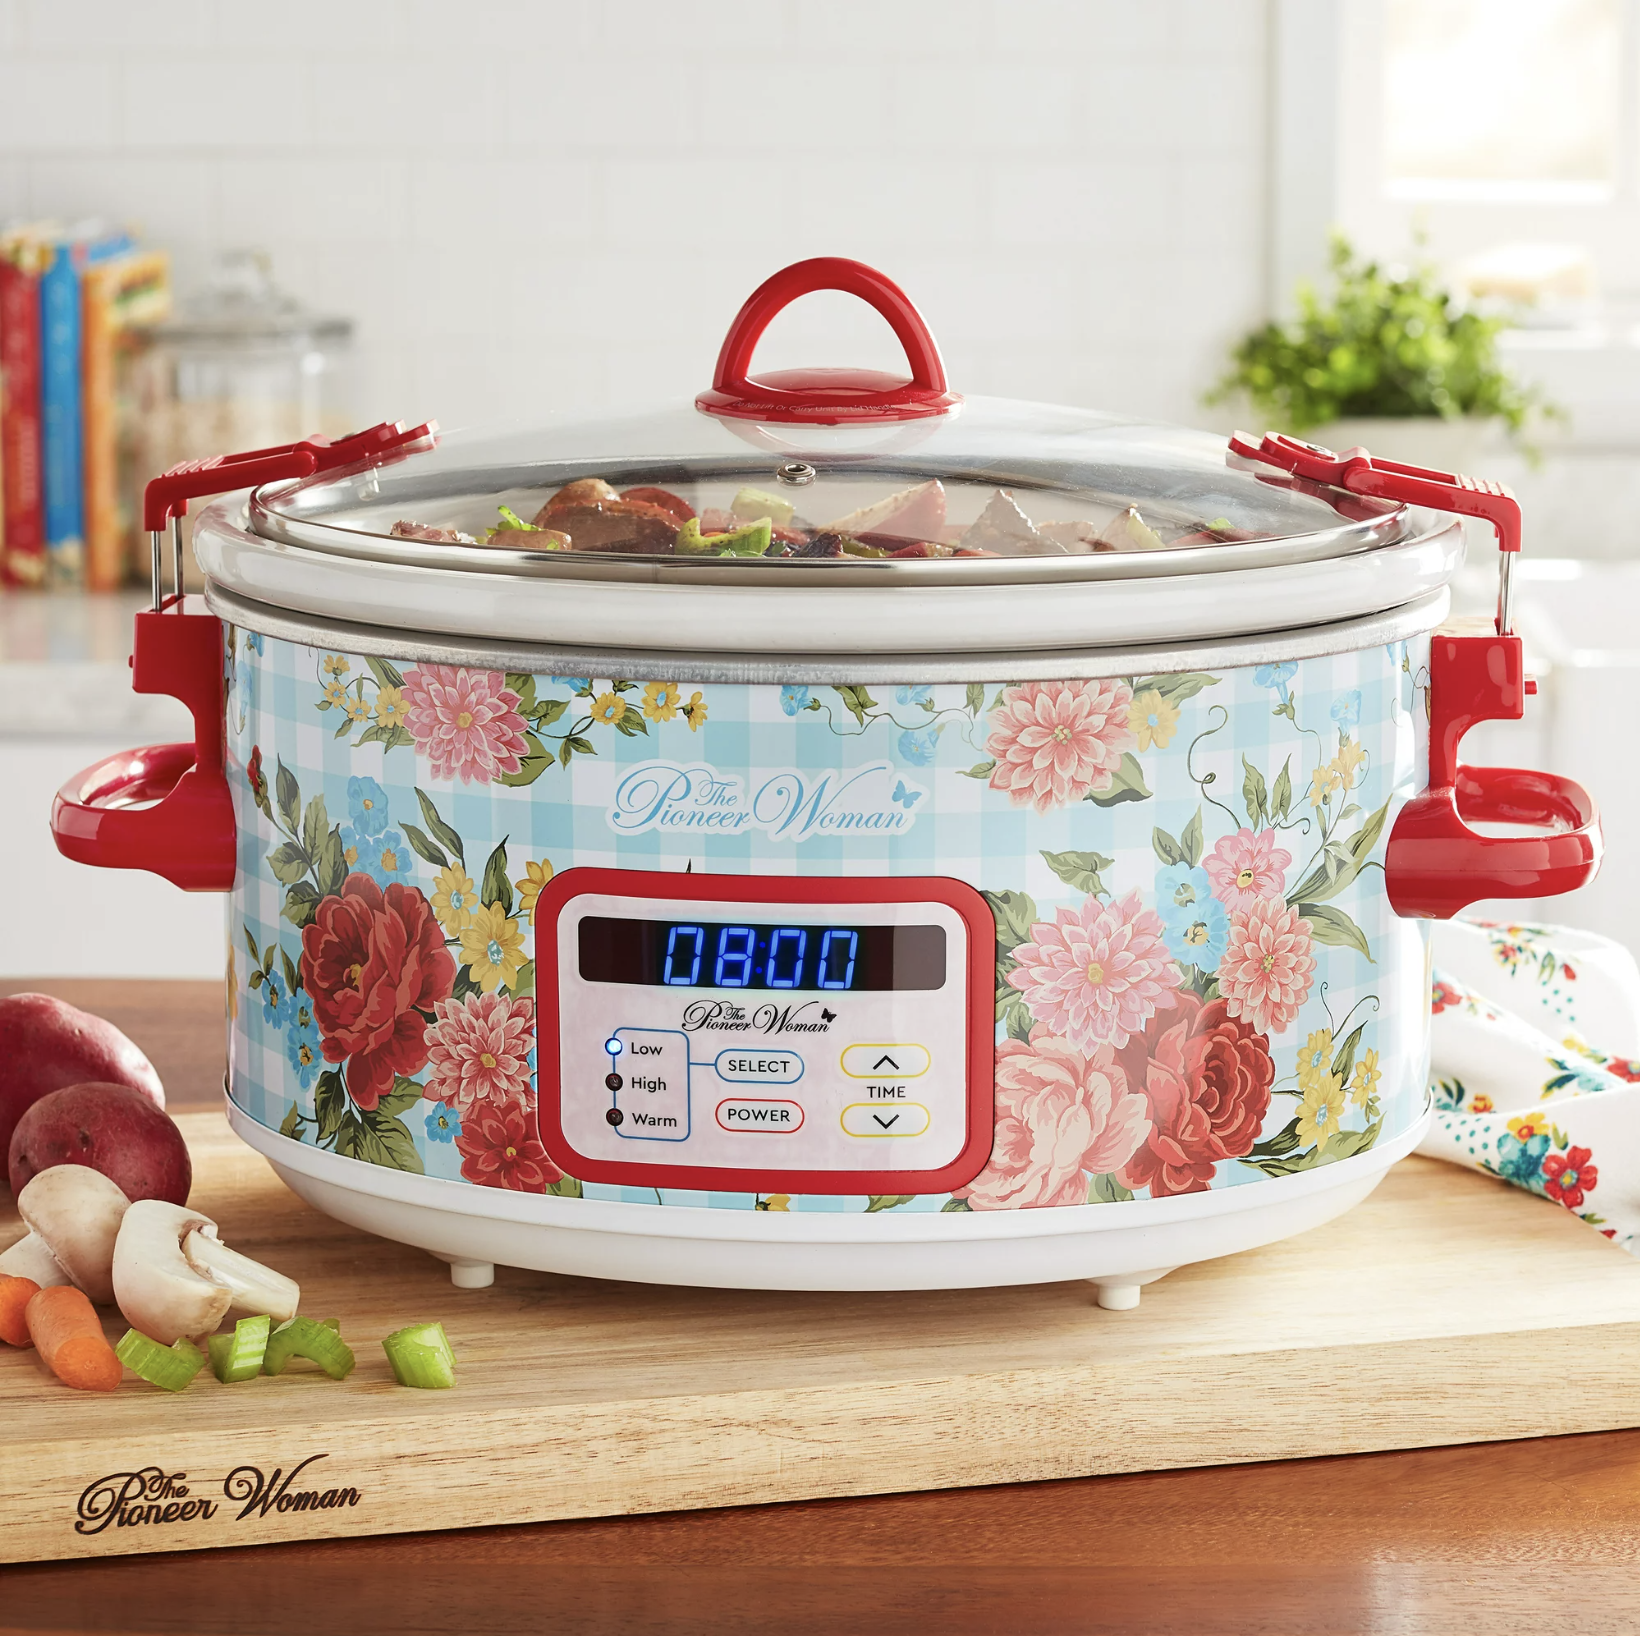 https://hips.hearstapps.com/hmg-prod/images/the-pioneer-woman-slow-cooker-1661979474.png